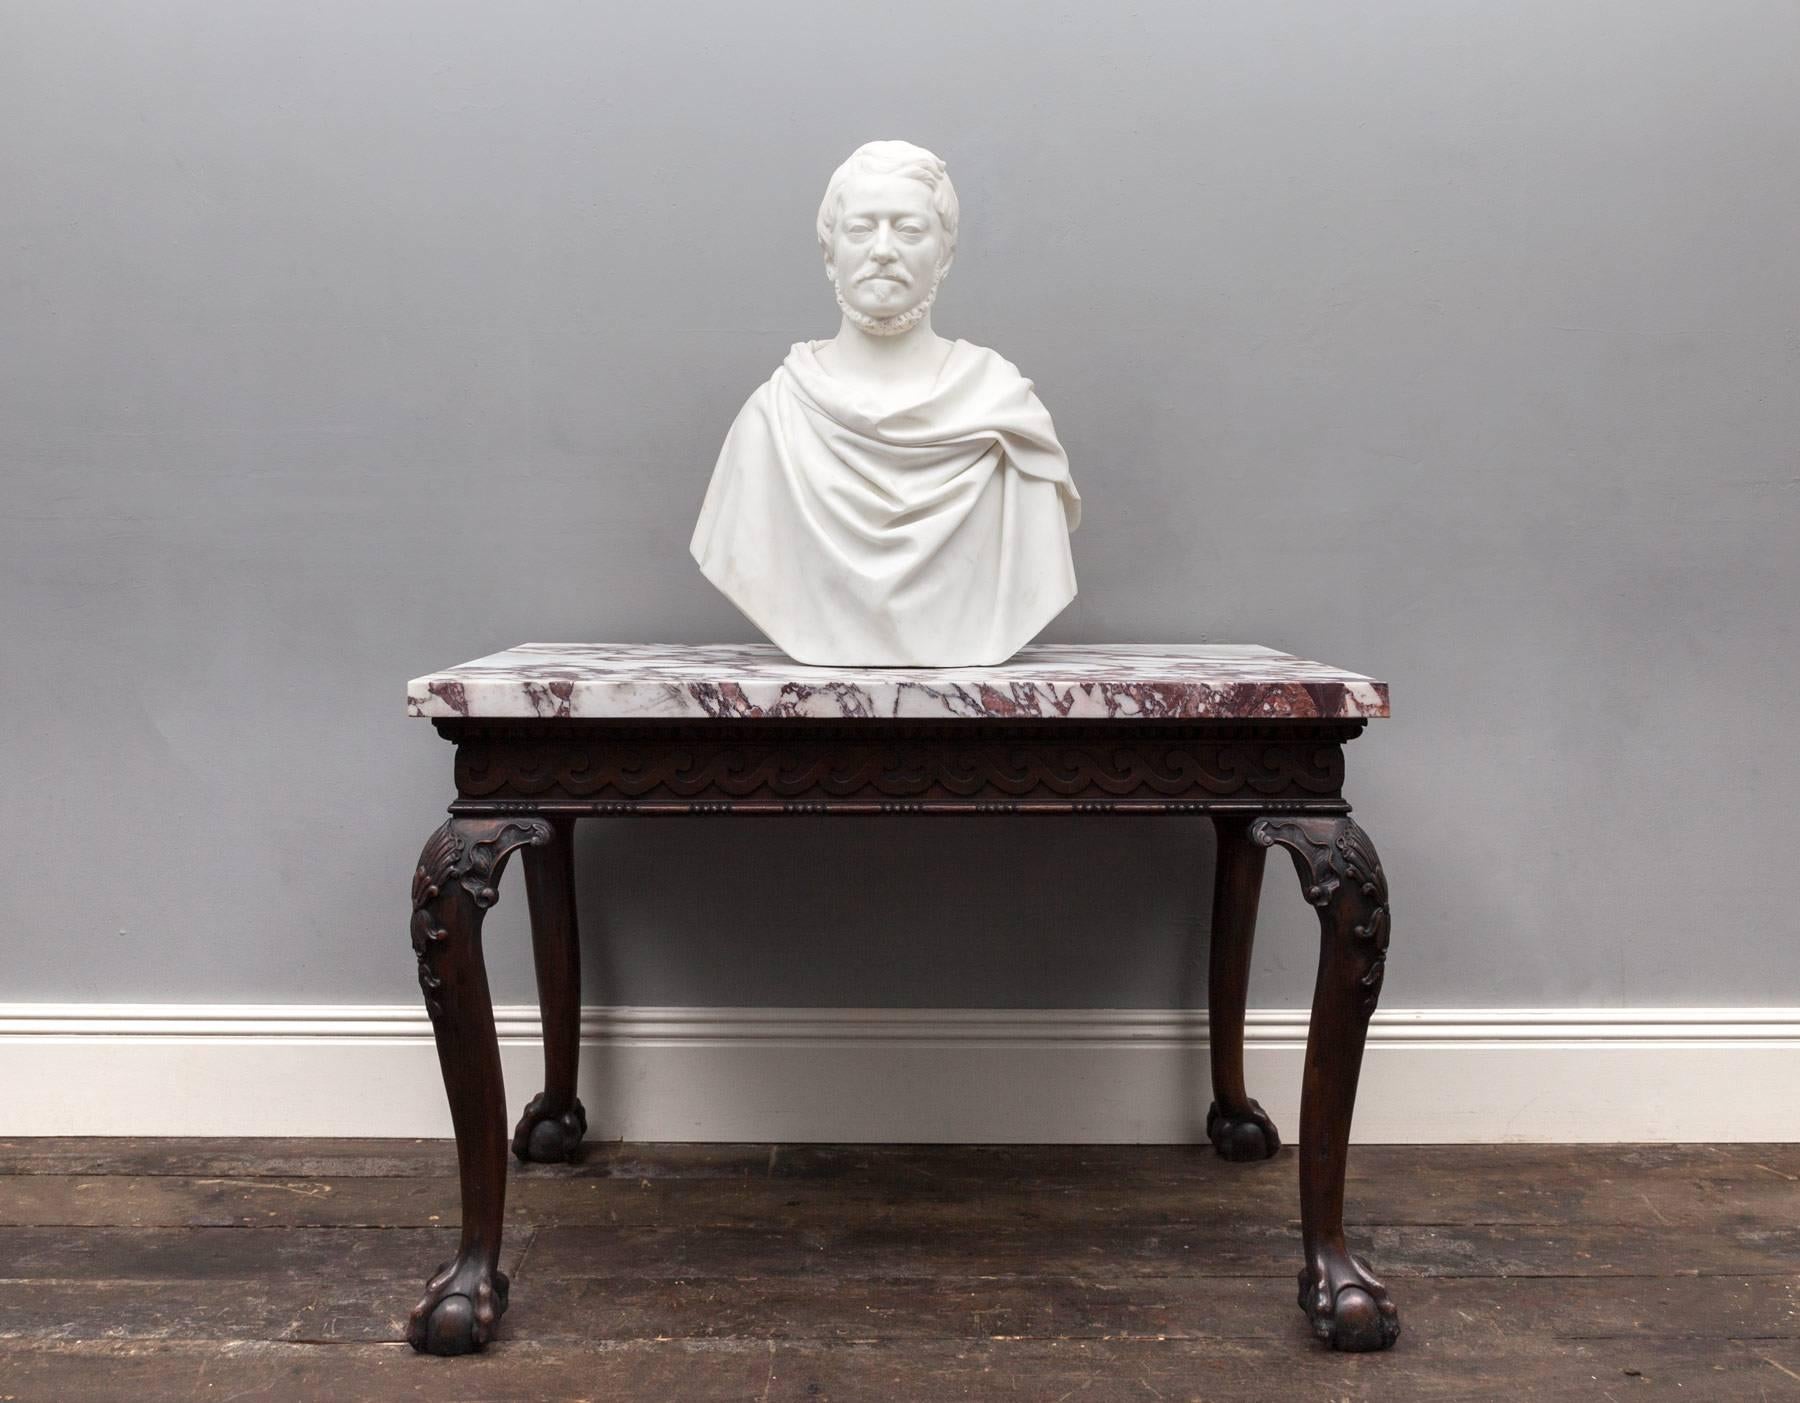 Antique statuary Carrara marble bust depicting a male in the classical Roman portrait style. Life-sized and beautifully carved in the purest of white statuary marble. 
The bust is of Sir Aubrey DeVere Hunt, 2nd Baronet (1788-1846), with stylized